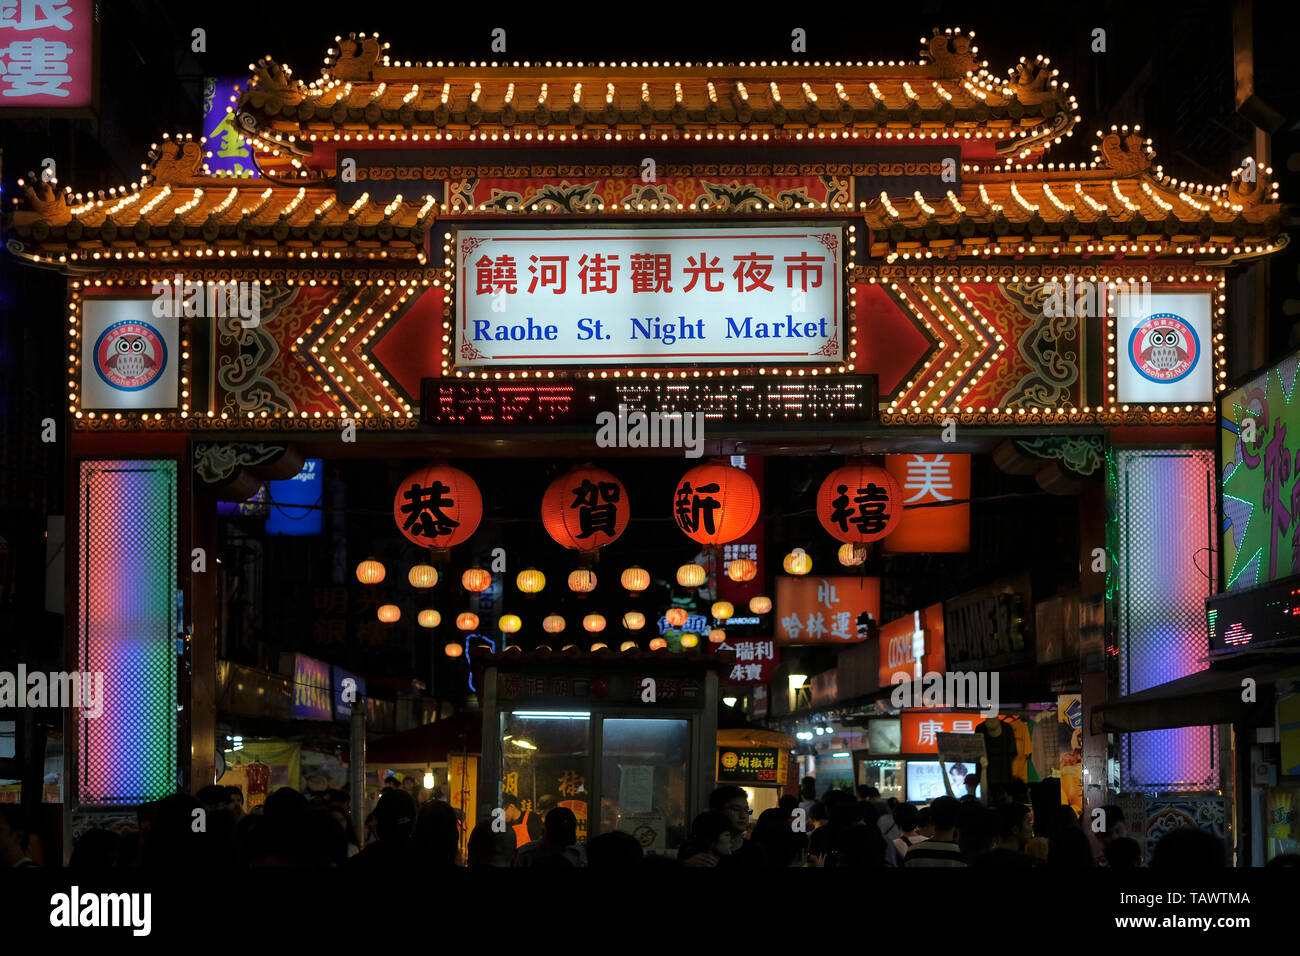 The decorated paifang to the Raohe Street Night Market one of the oldest night markets in Songshan District, Taipei, Taiwan. Stock Photo